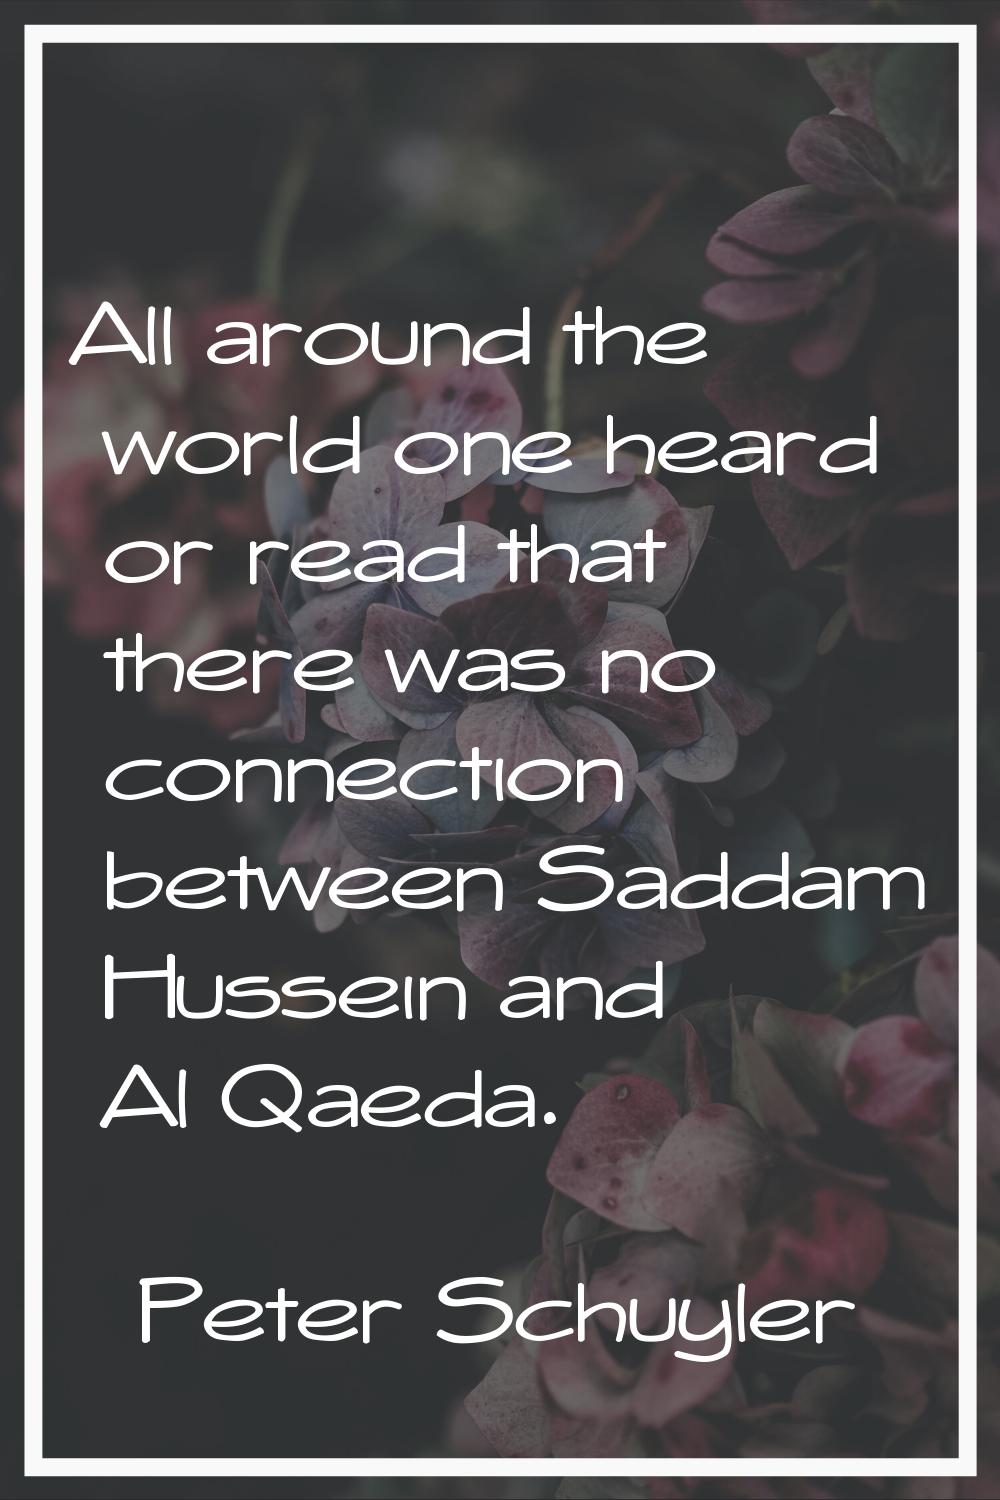 All around the world one heard or read that there was no connection between Saddam Hussein and Al Q